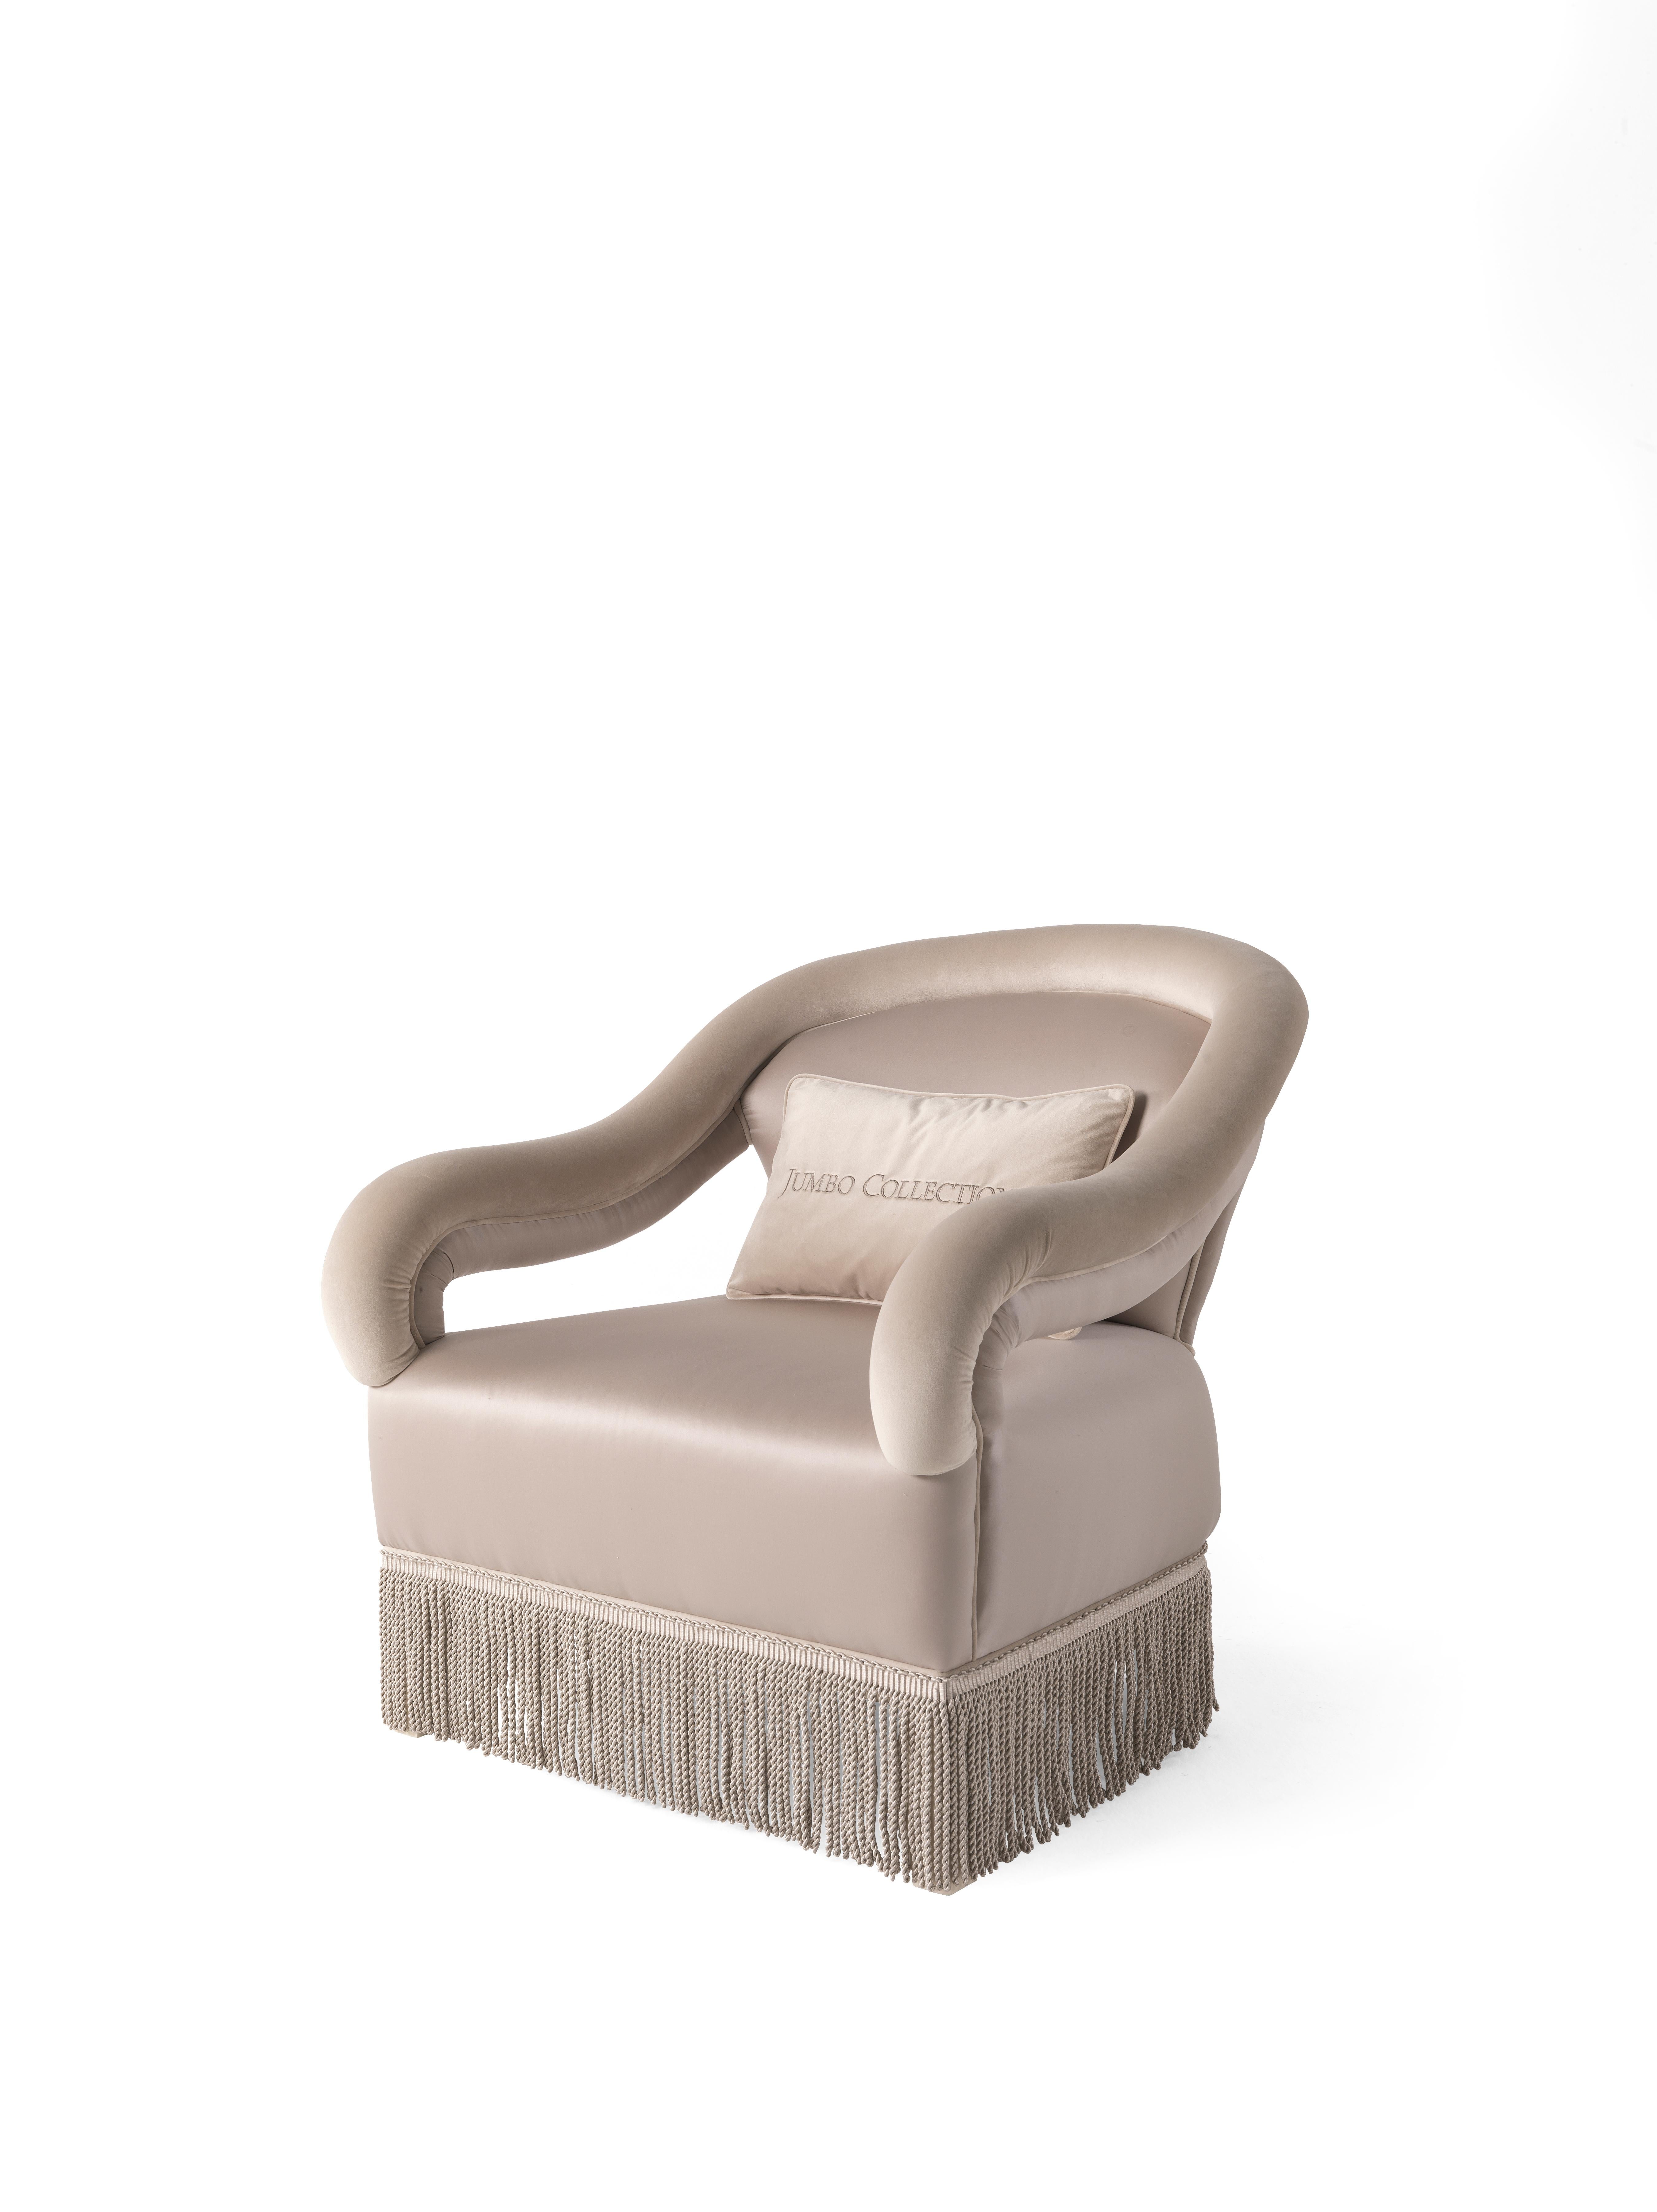 Soft lines and timeless design for the Pegaso line. The seats are characterized by a lateral opening which gives the furniture a special lightness. The fringes add a decorative note that enhances the sophisticated atmosphere that is typical of Jumbo